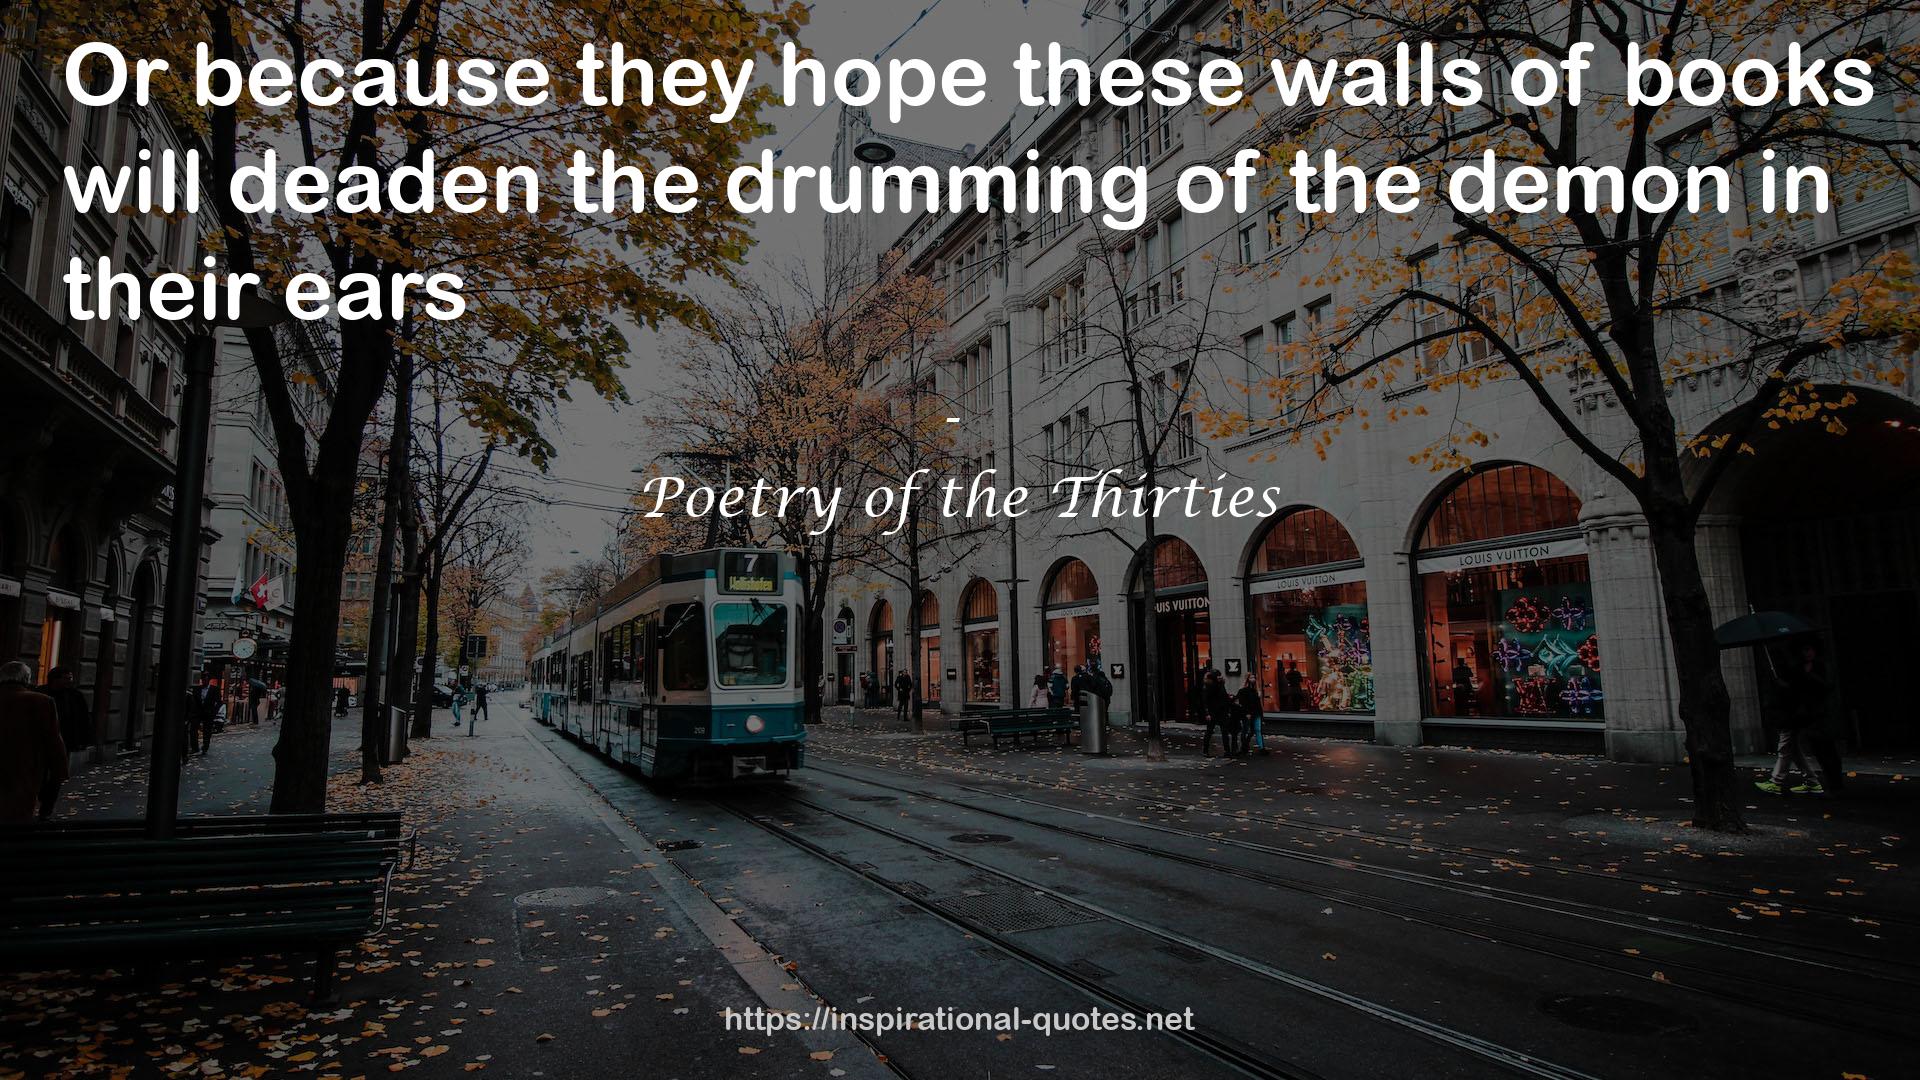 Poetry of the Thirties QUOTES